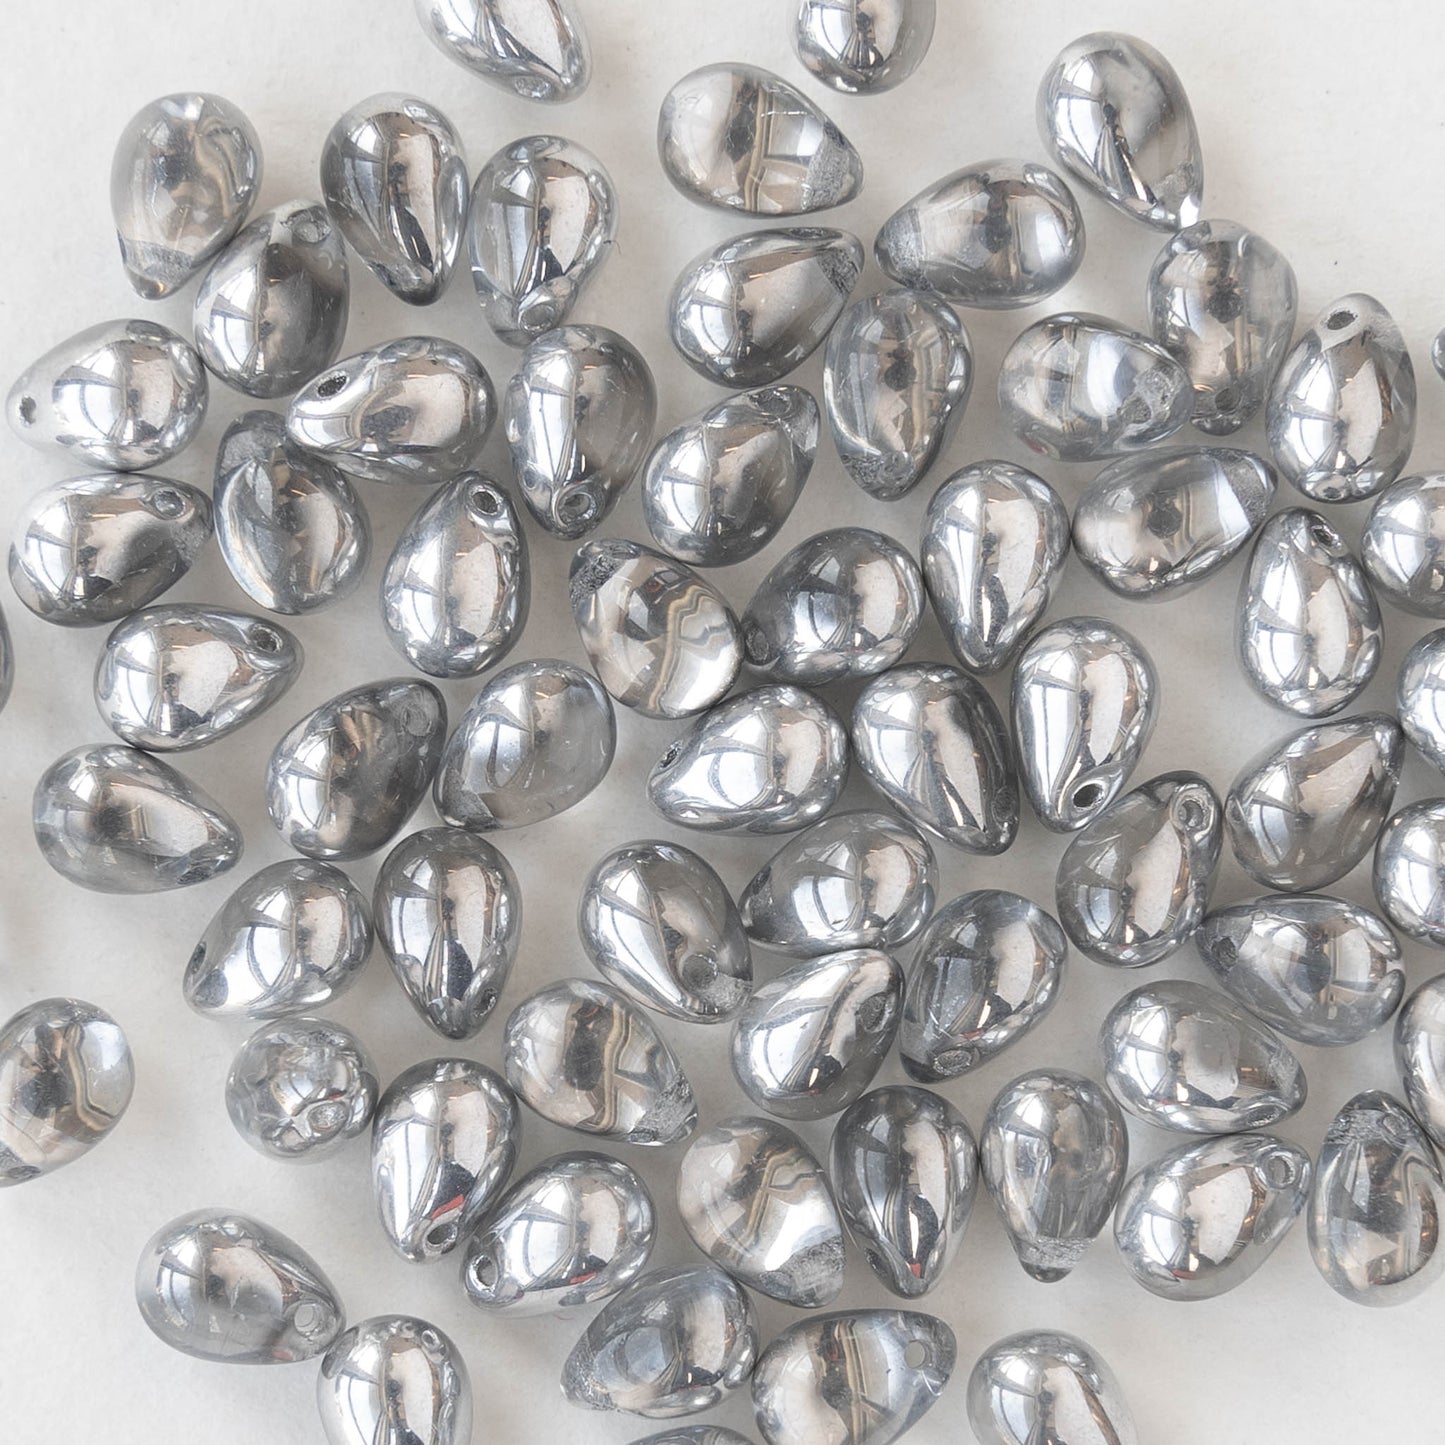 Load image into Gallery viewer, 5x7mm Glass Teardrop Beads - Crystal with Silver Coat - 75 Beads
